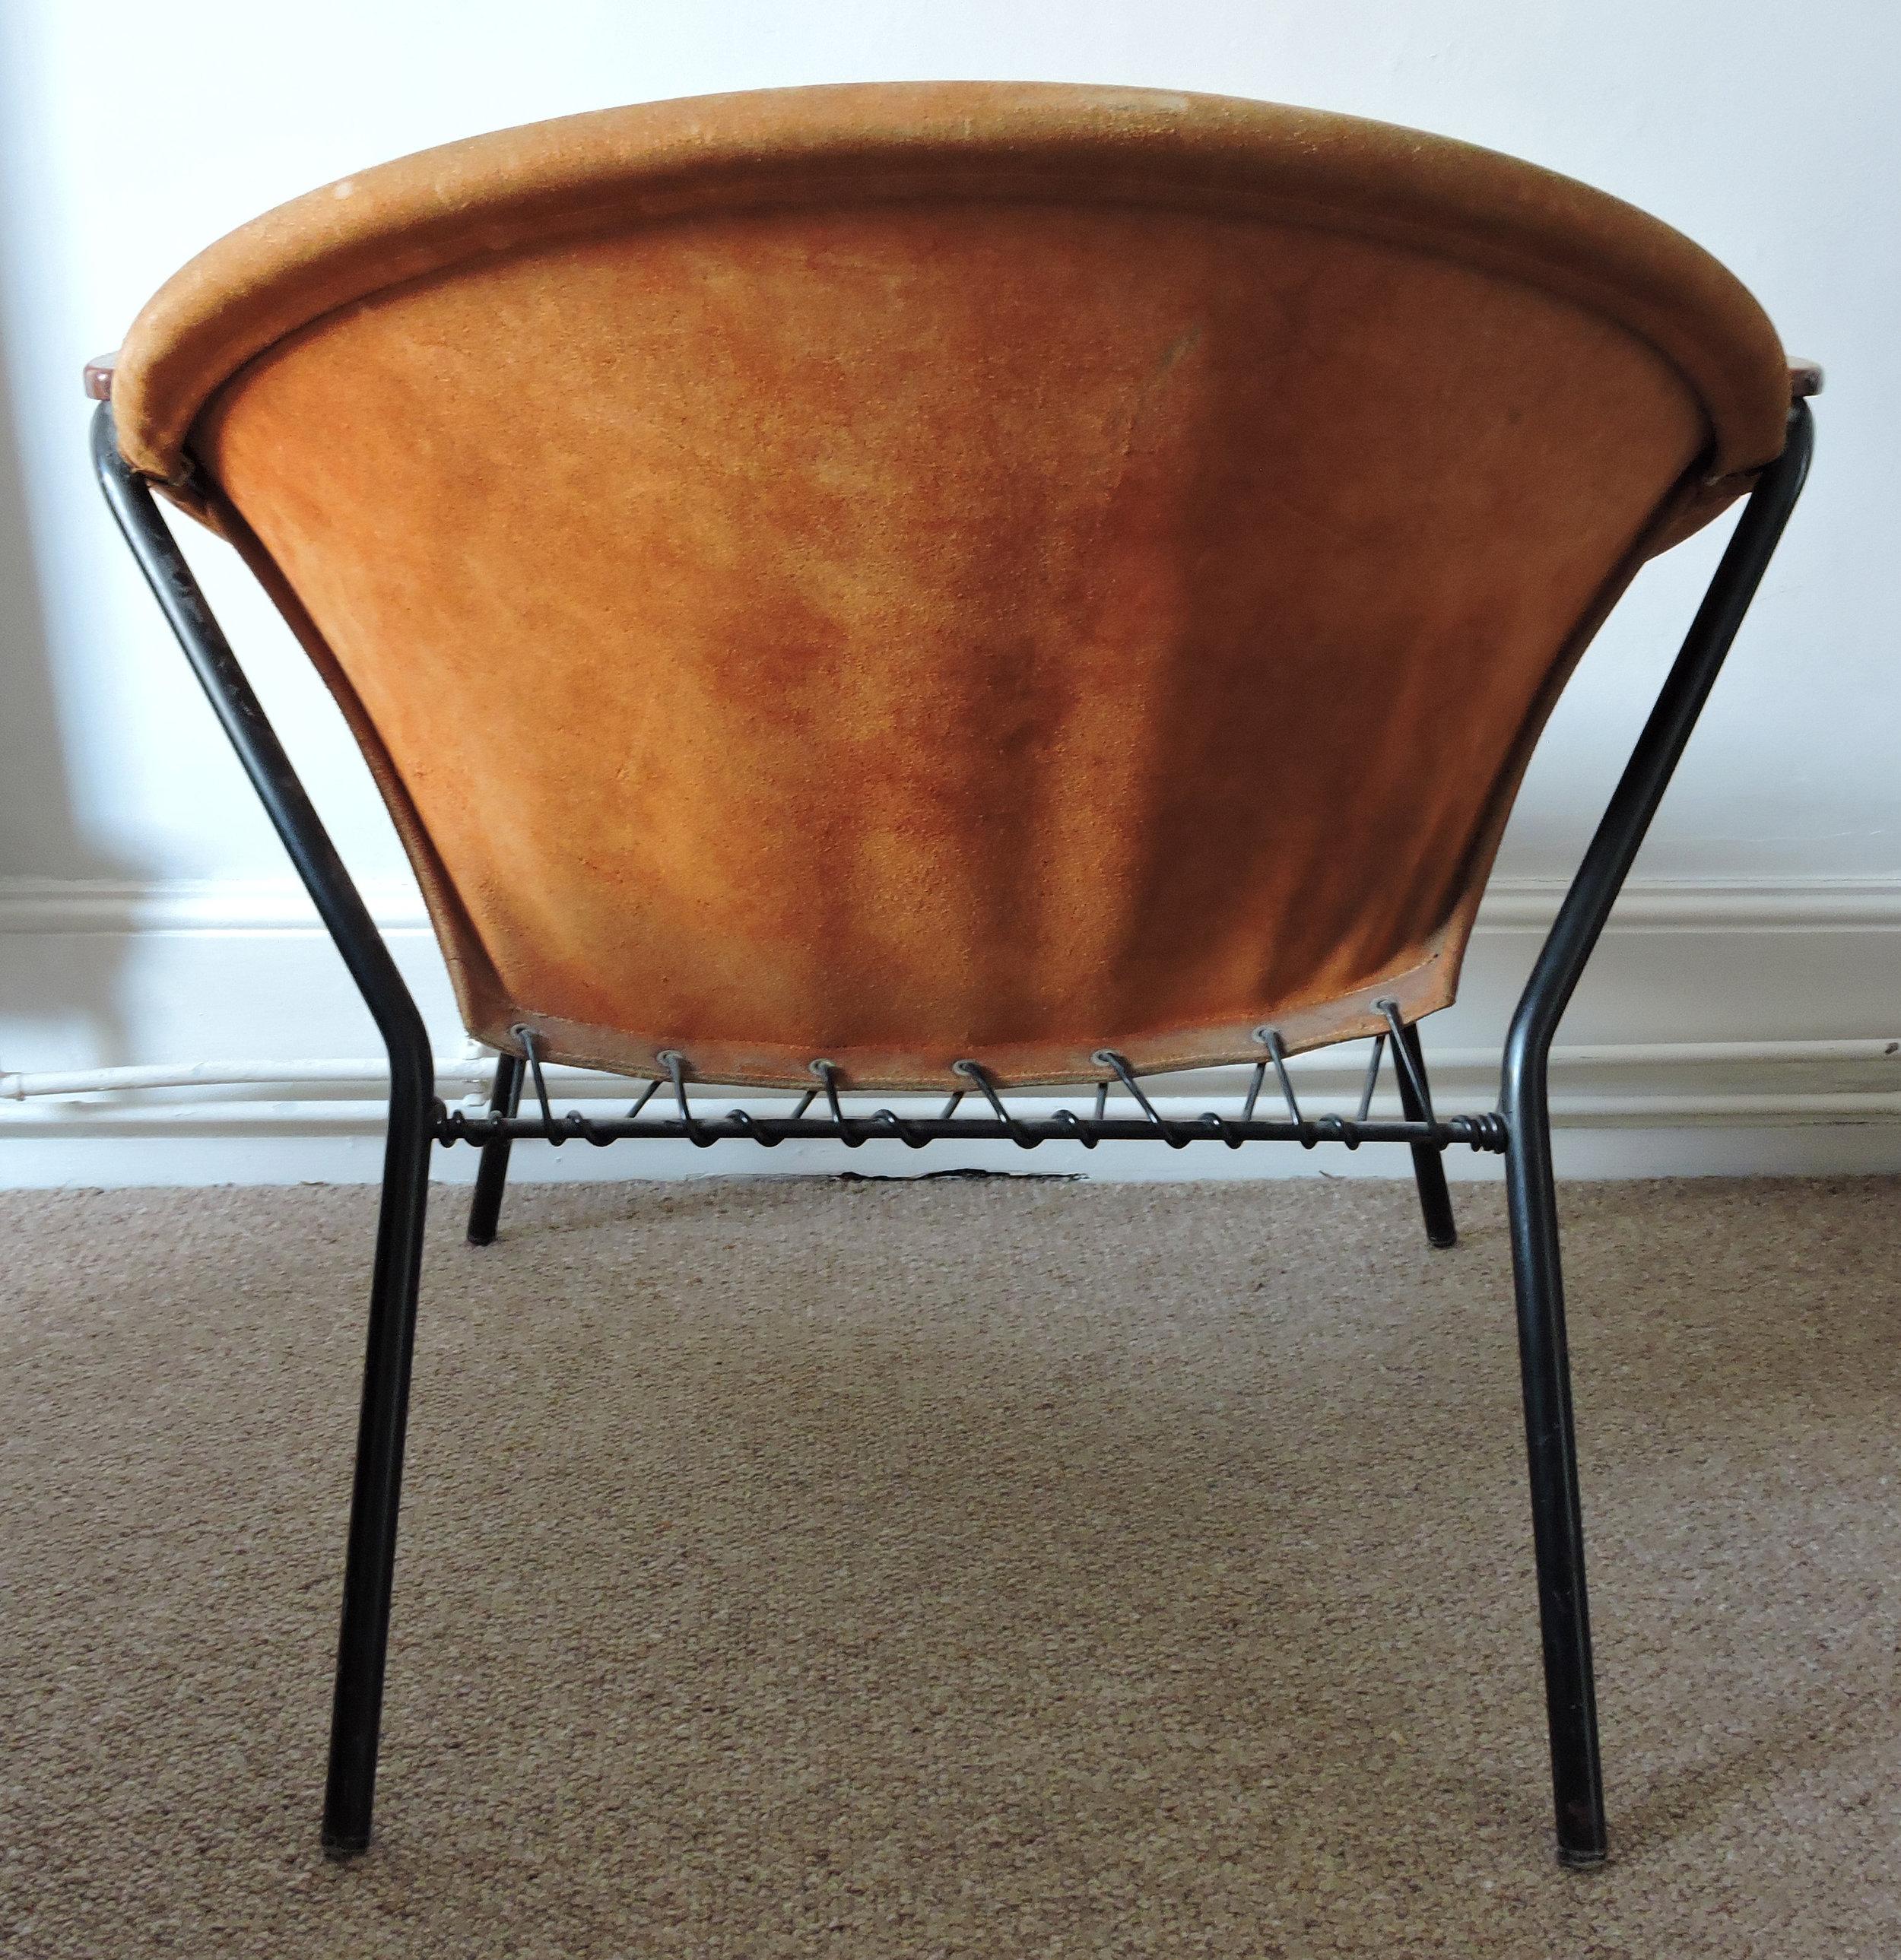 Mid-20th Century Balloon Chair by Hans Olsen for Lea Design, 1960s For Sale